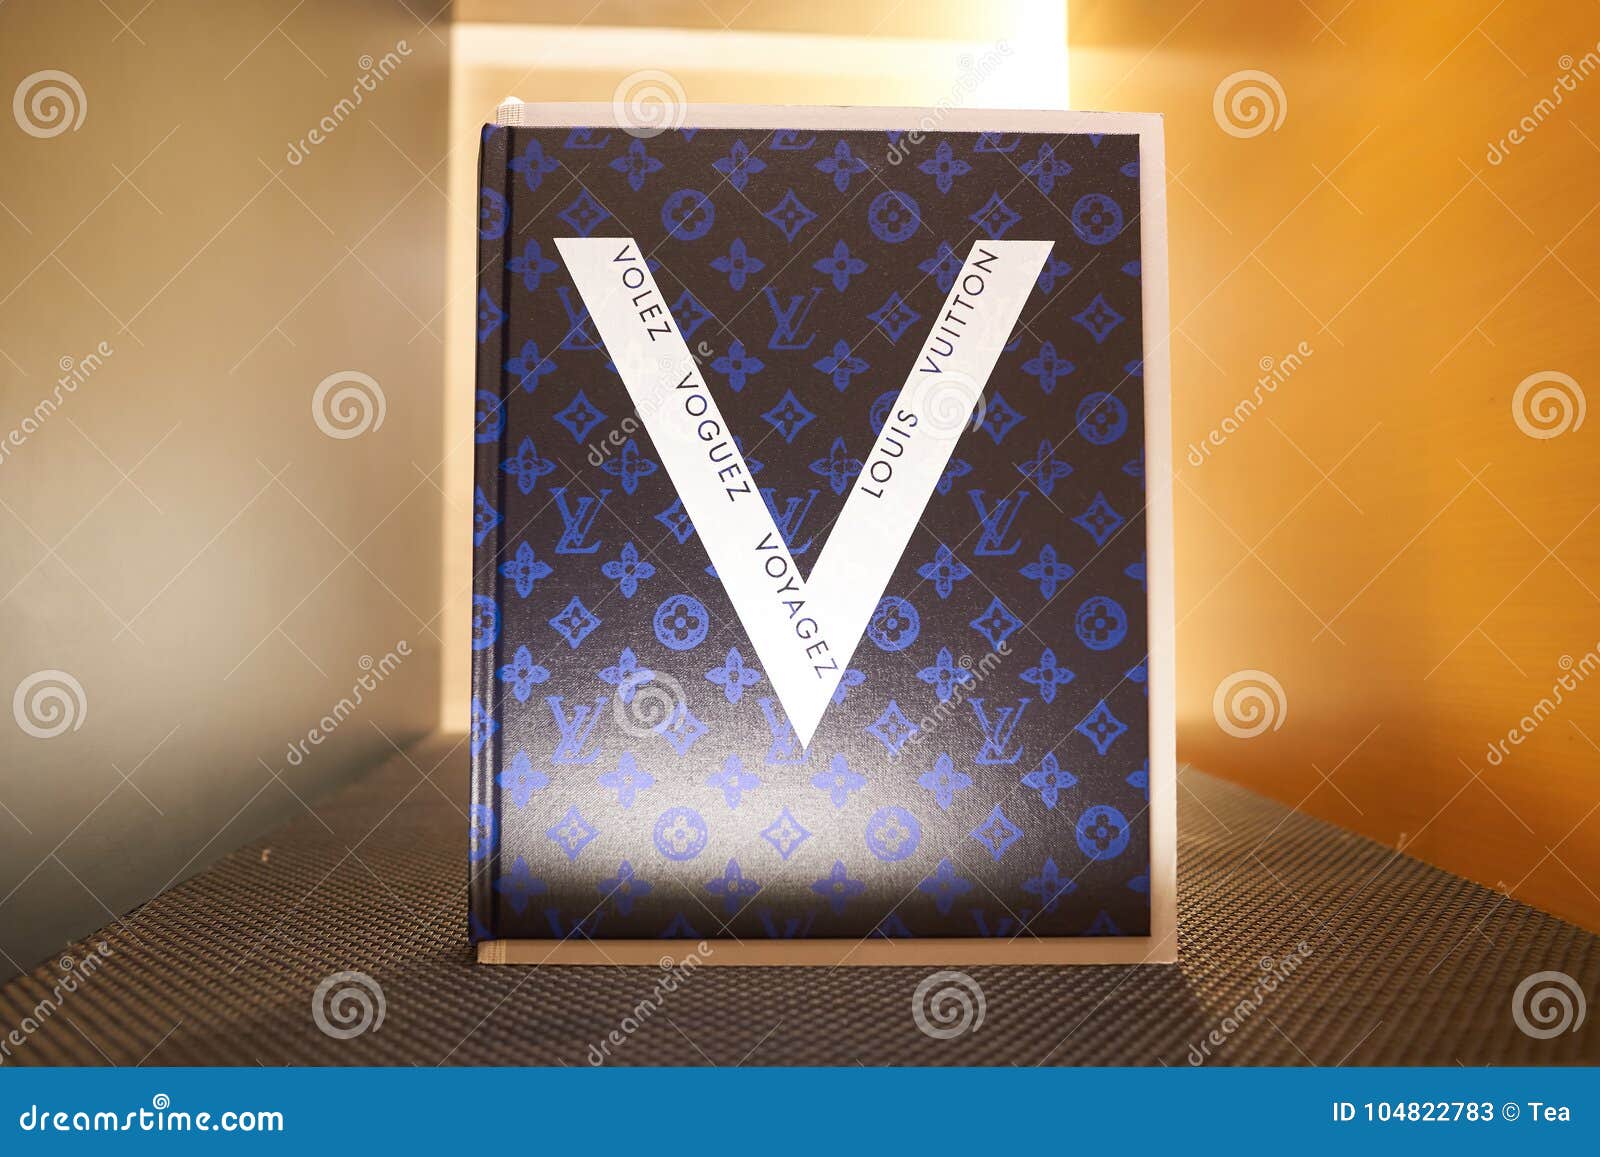 500 Louis vuitton shopping bag Stock Pictures, Editorial Images